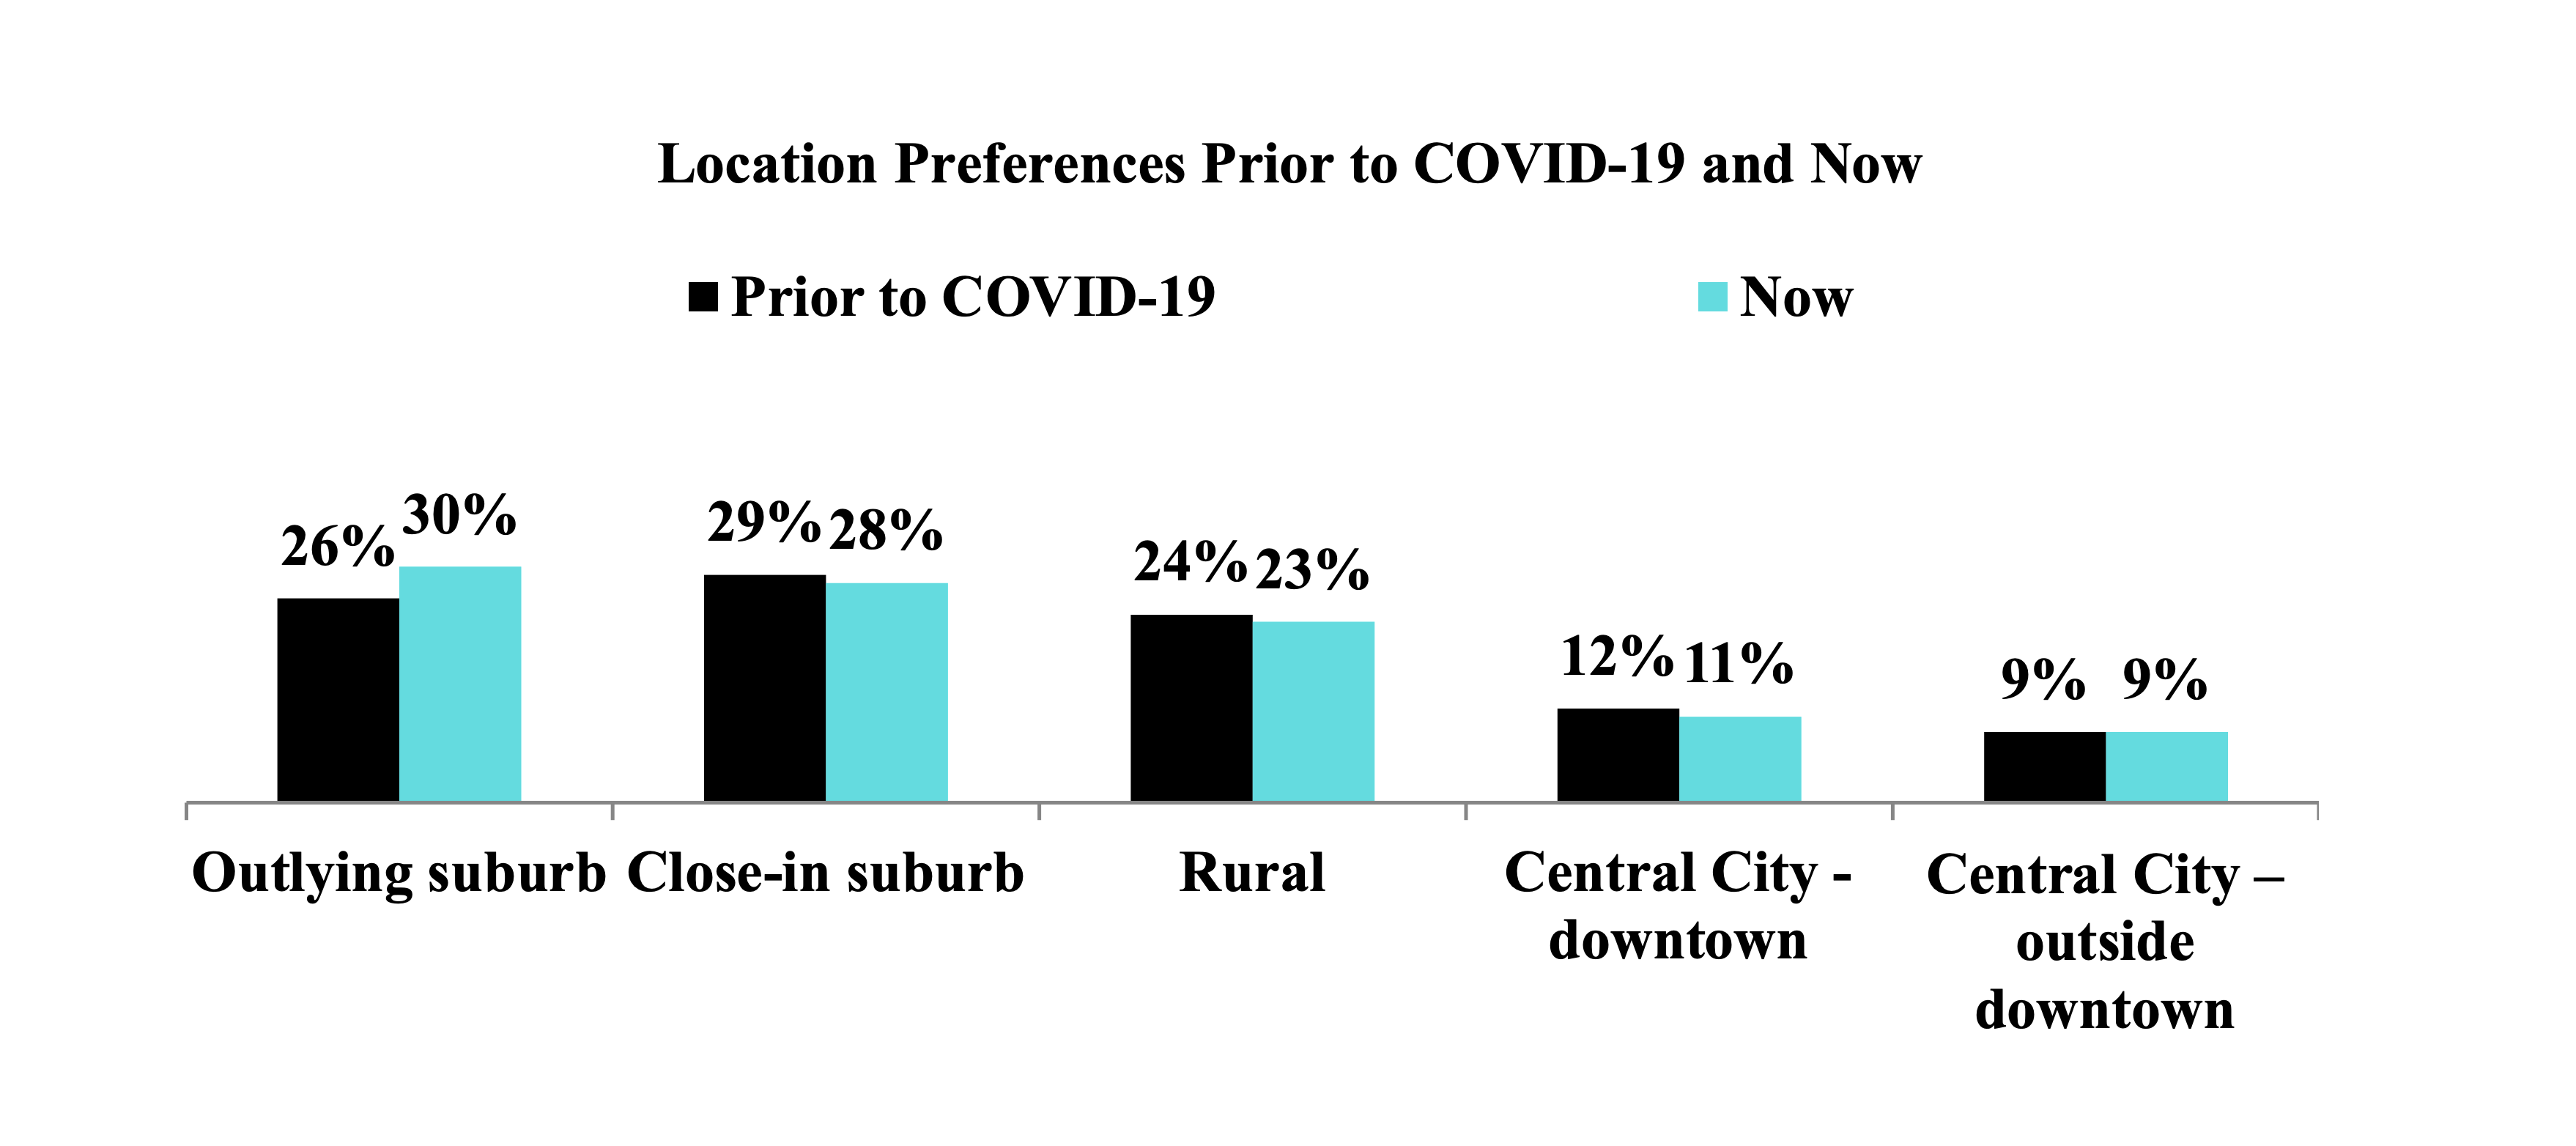 NAHB Location Preferences Prior to COVID-19 and Now Results